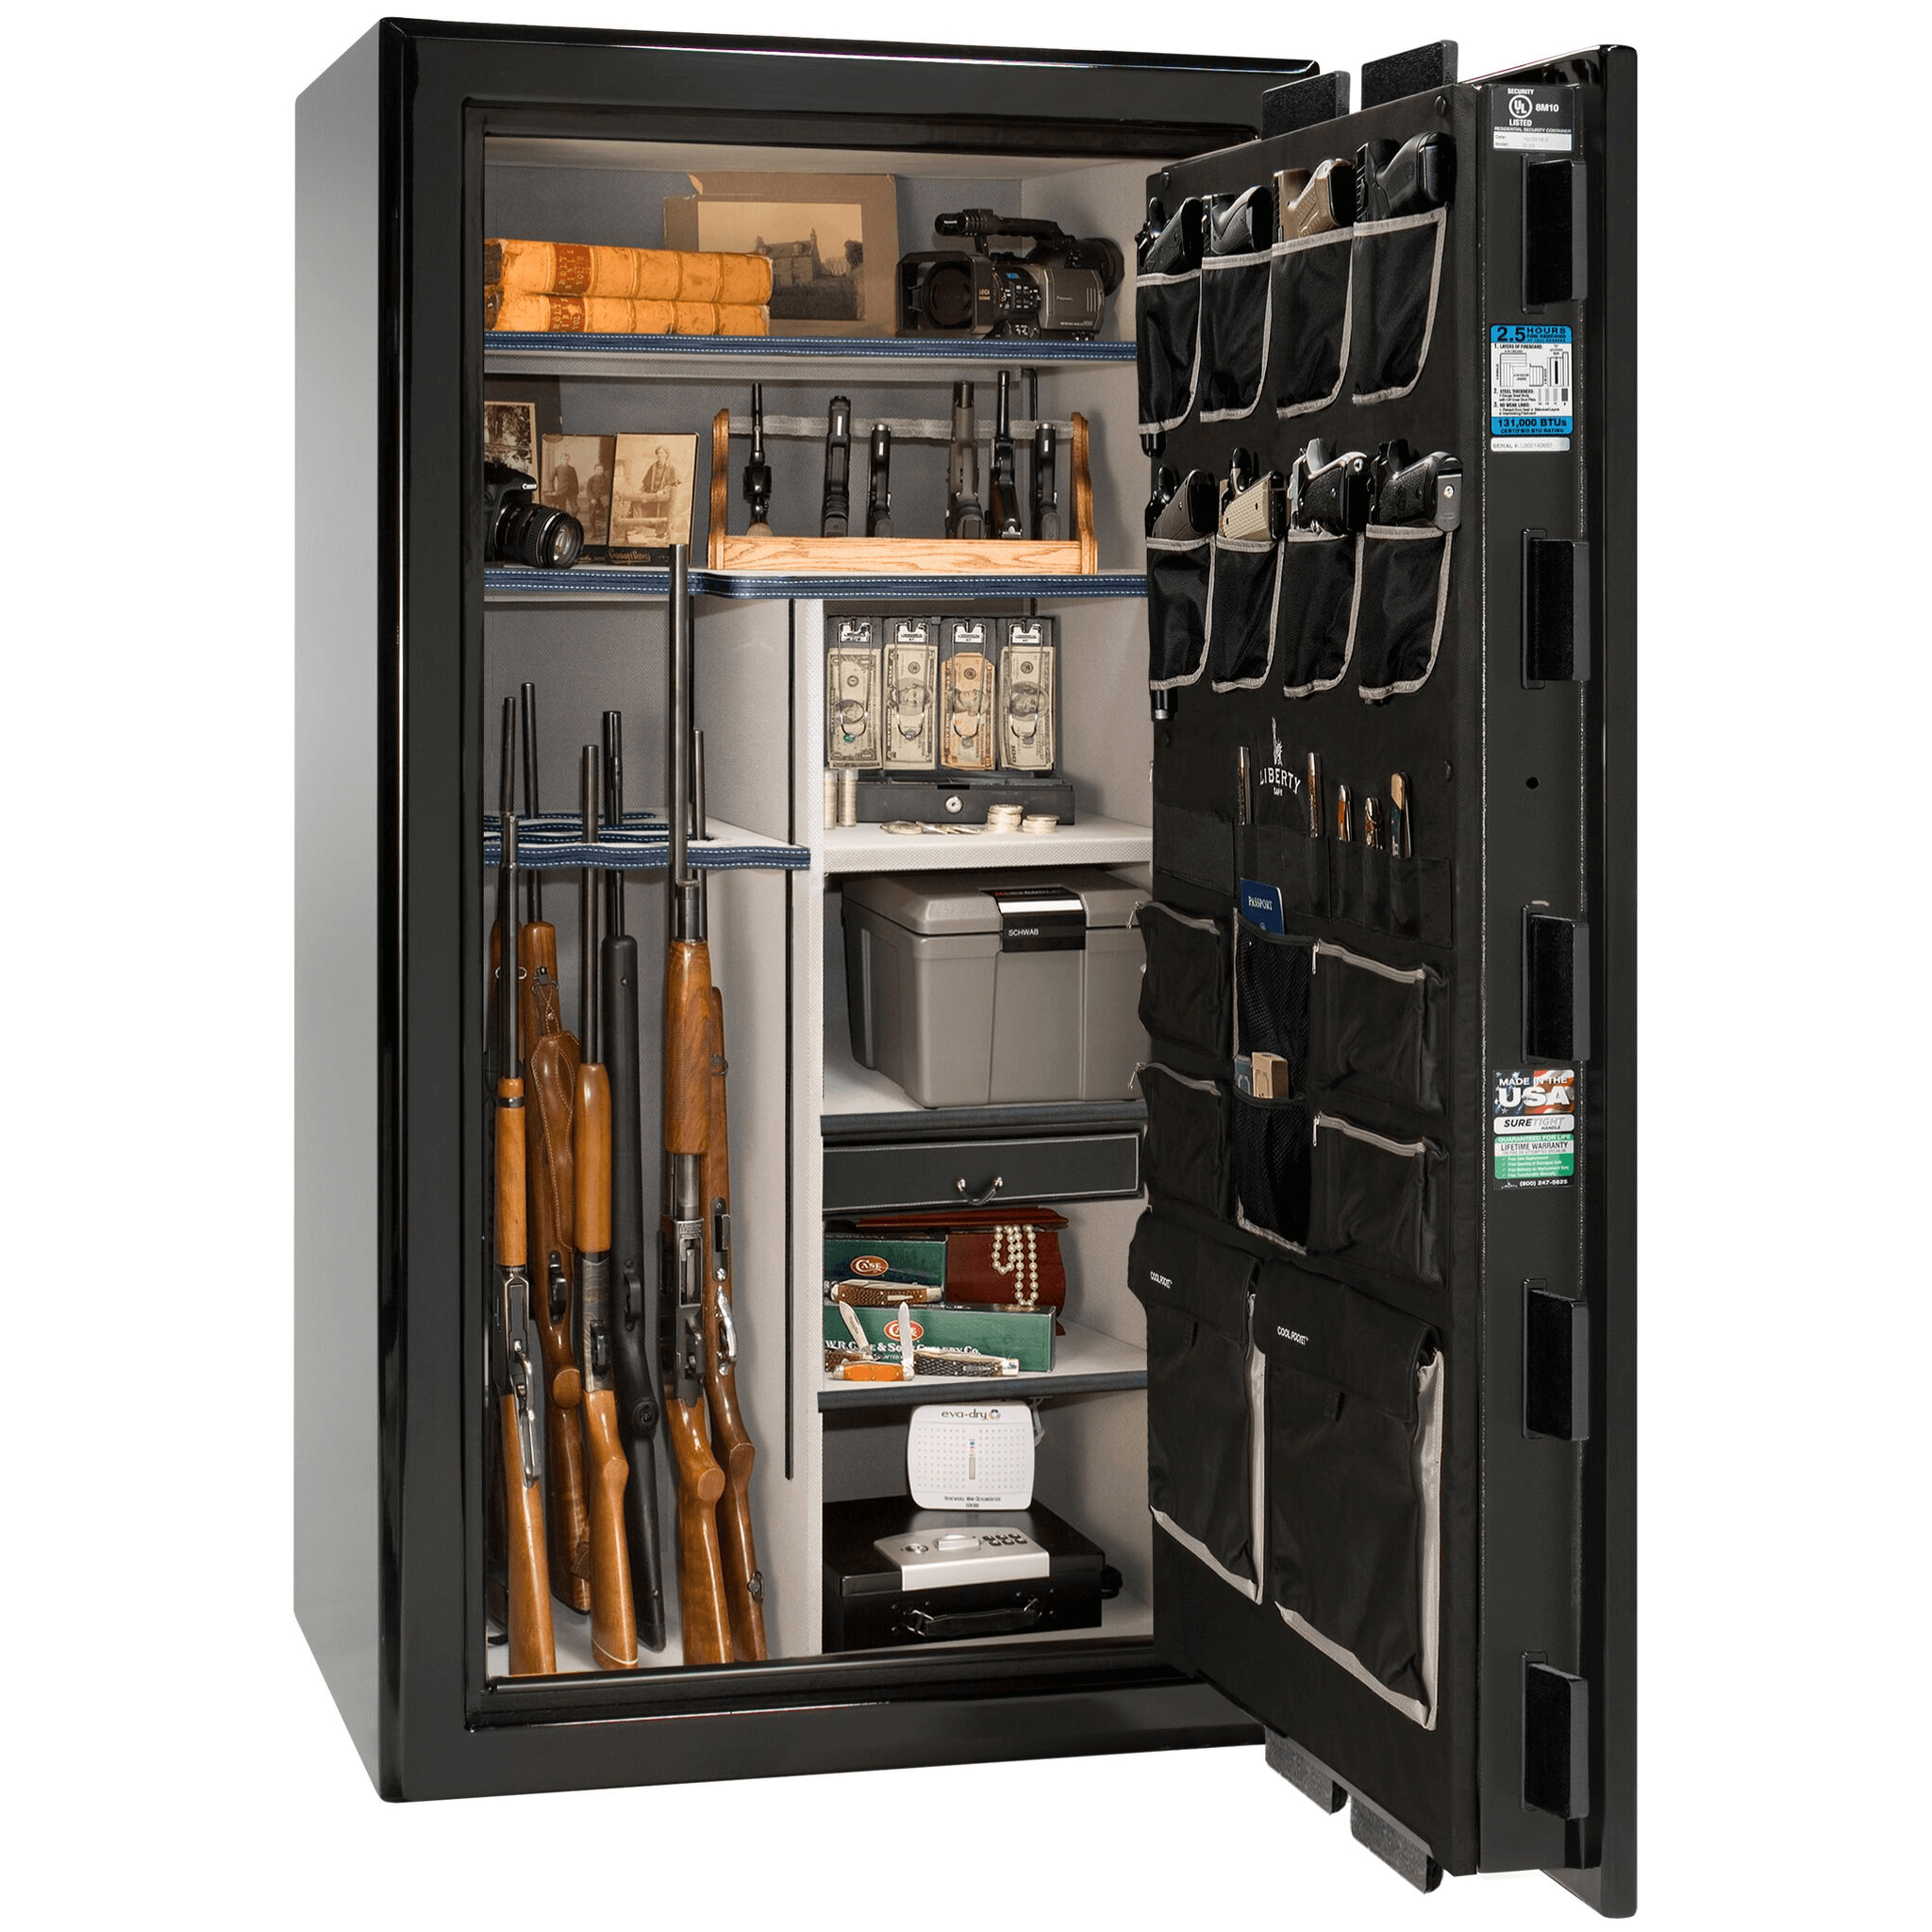 Presidential Series | Level 8 Security | 2.5 Hours Fire Protection | 40 | Dimensions: 66.5"(H) x 36.25"(W) x 32"(D) | Black Gloss | Chrome Hardware | Electronic Lock